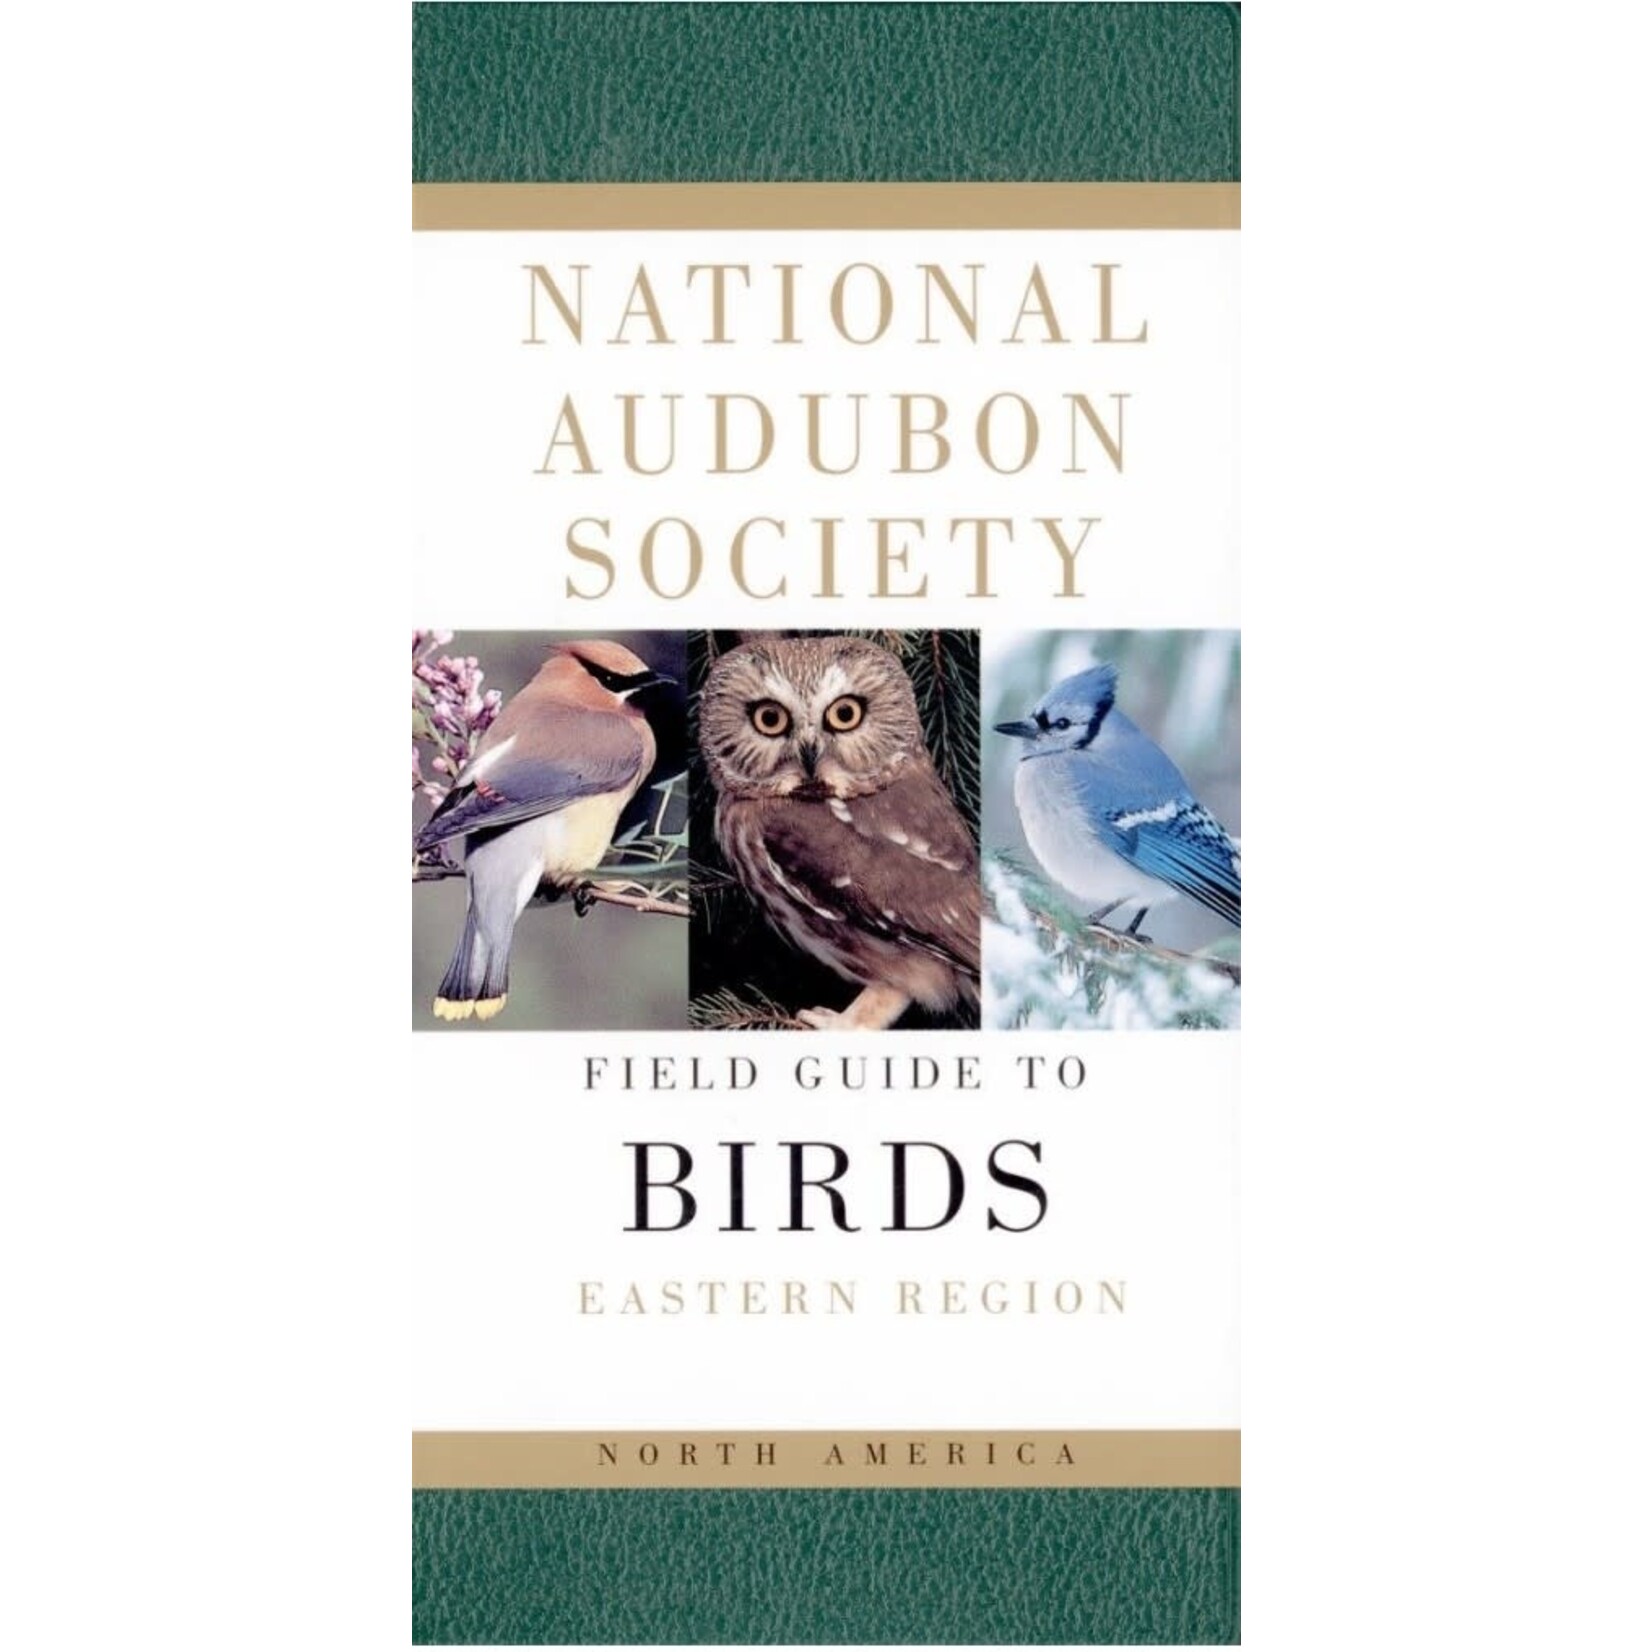 National Audubon Society Field Guide to North American Birds--E: Eastern Region - Revised Edition (Revised)